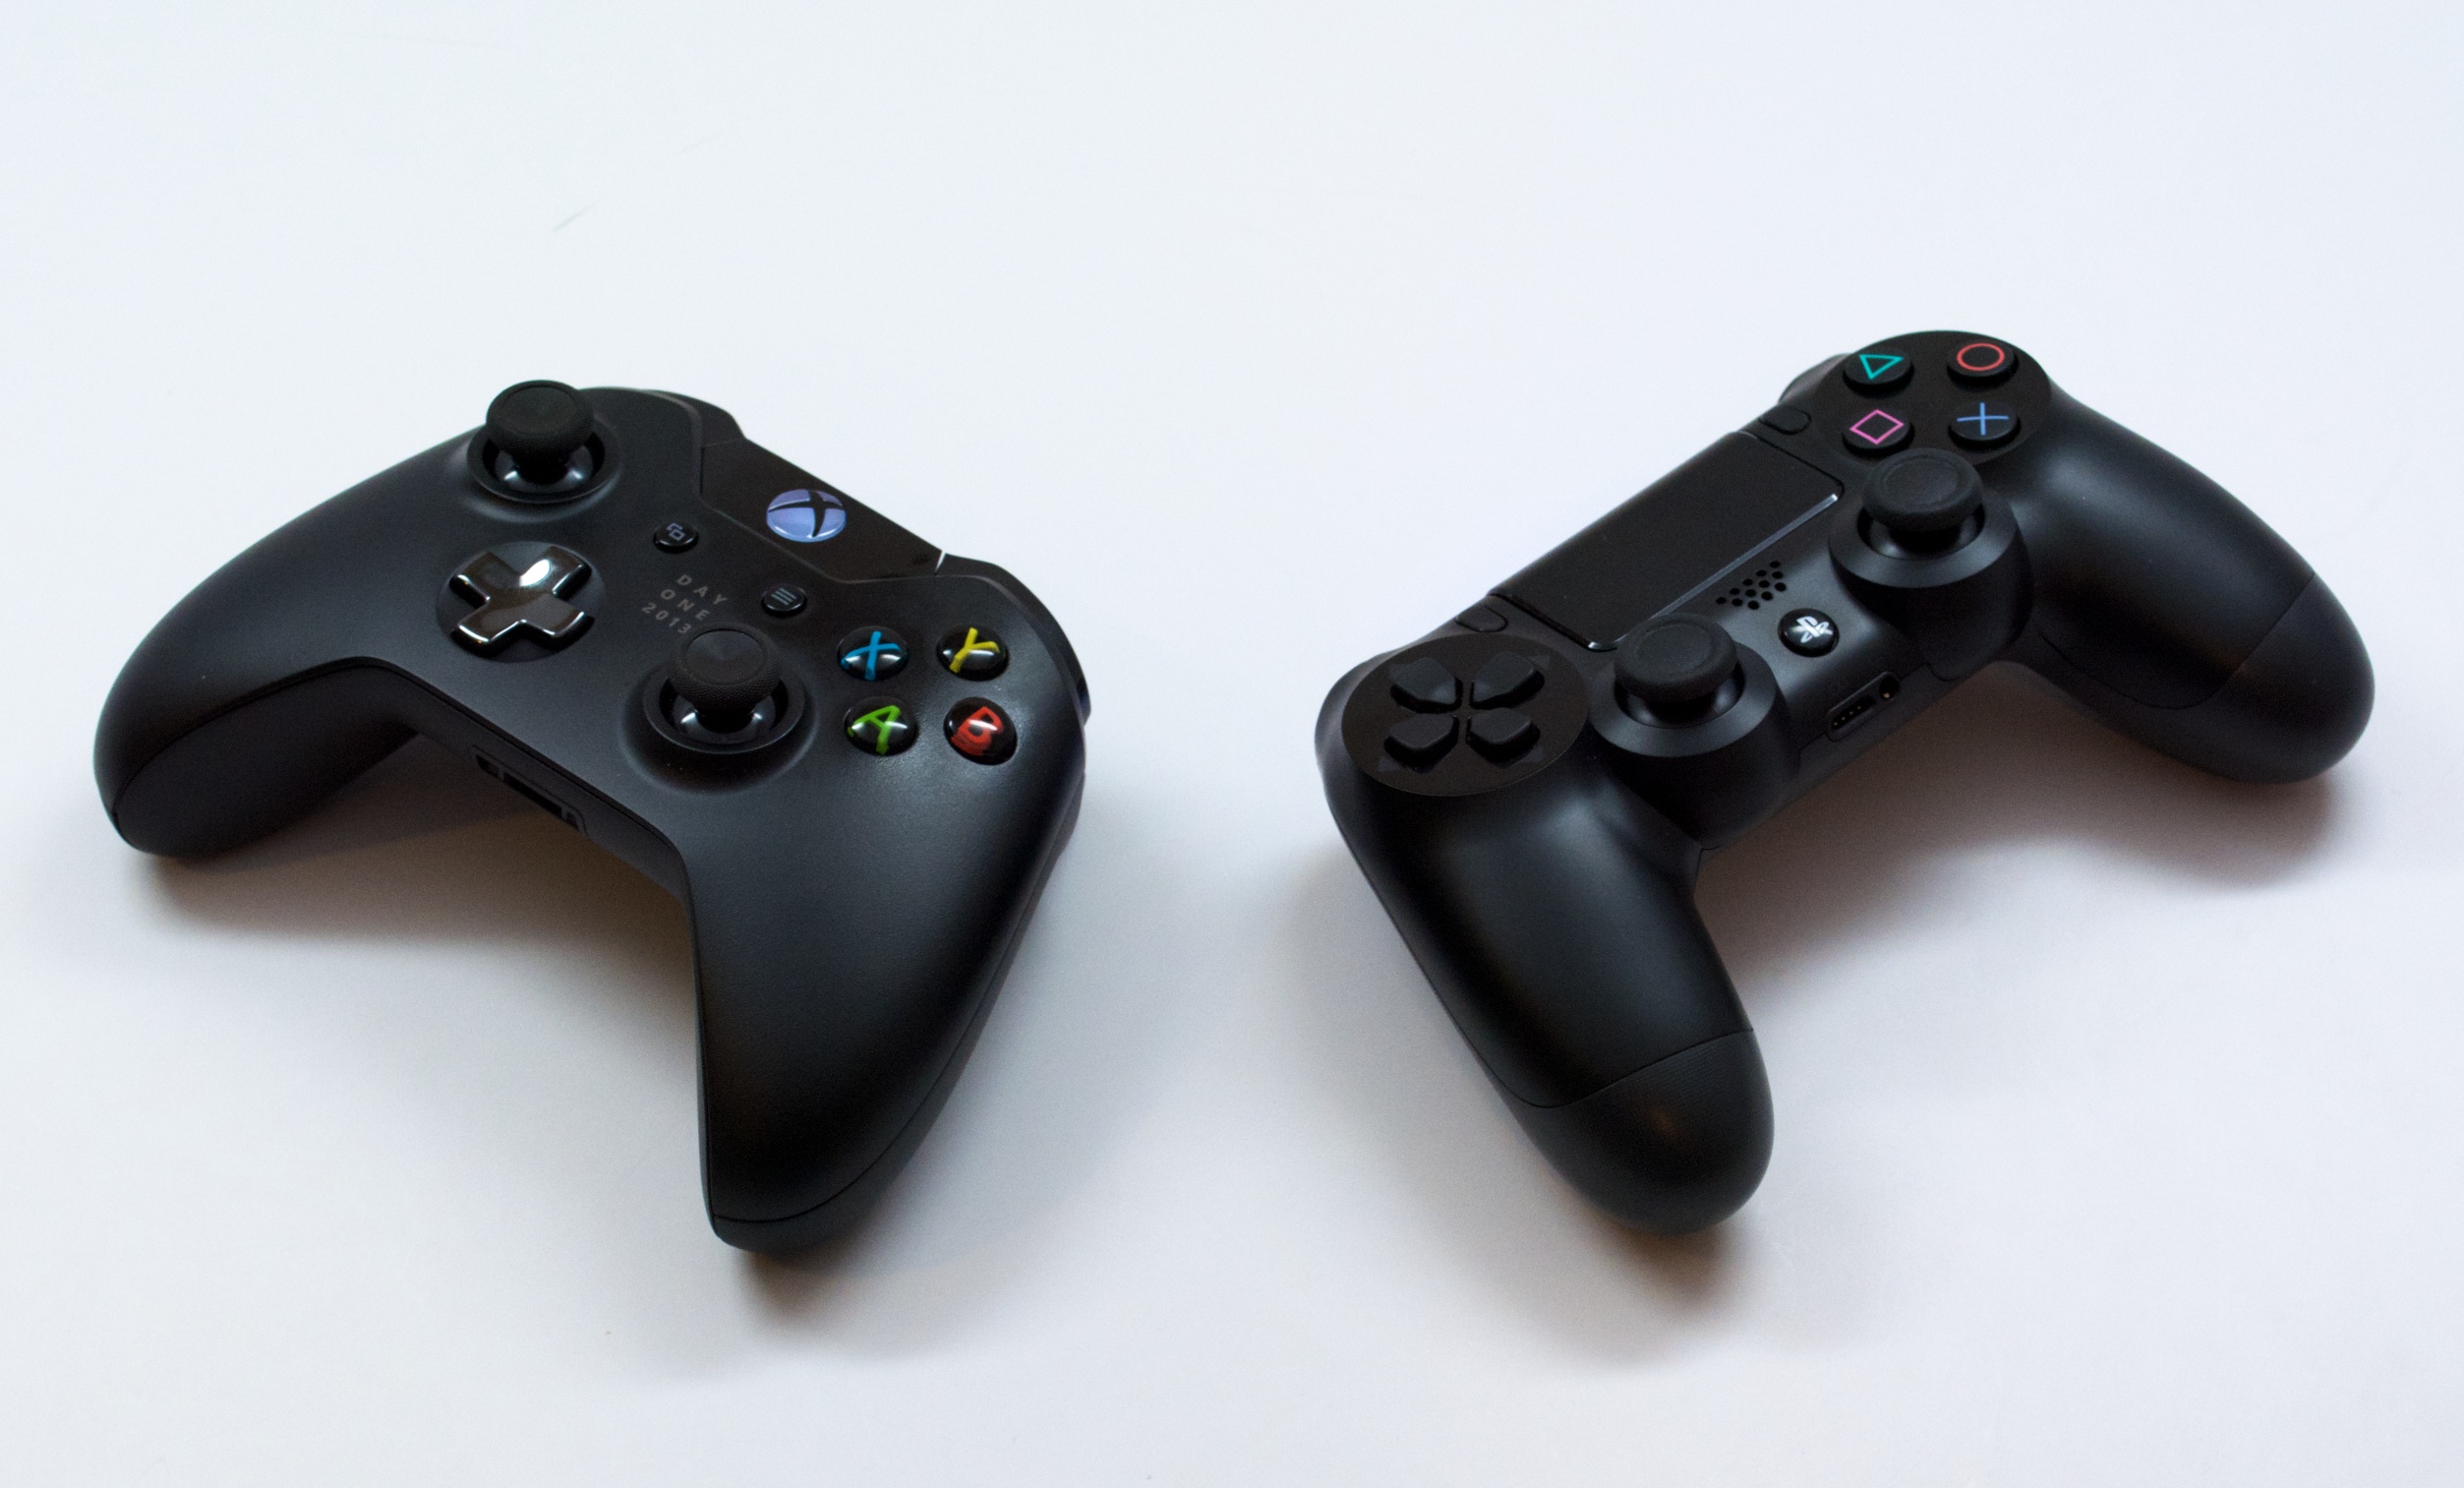 Microsoft will allow cross platform play with PS4 and PC players